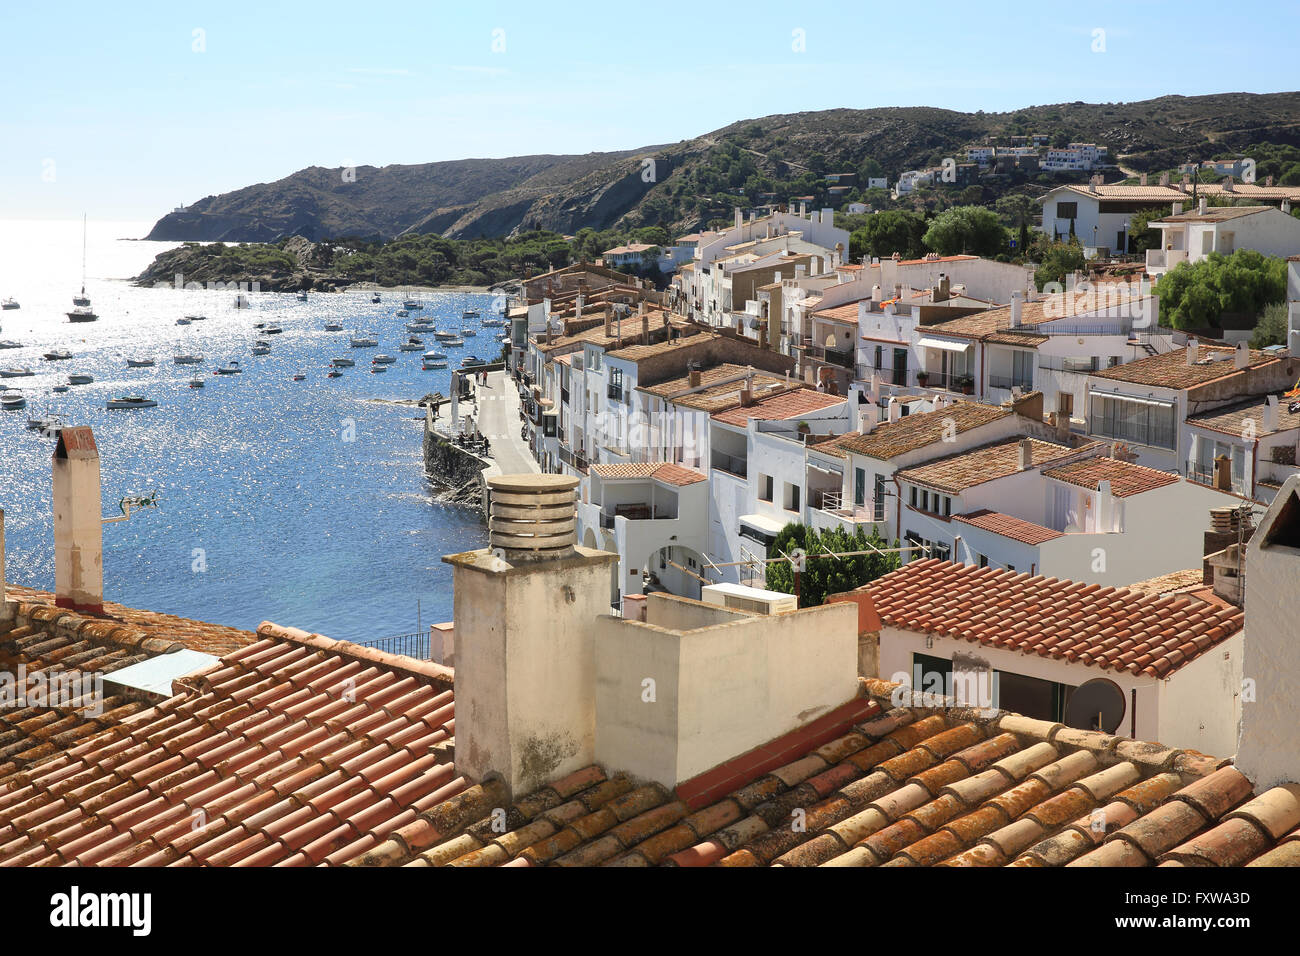 A view of pretty white washed Cadaques, on the Cap de Creus peninsular, in Catalonia, on the Costa Brava, Spain, Europe Stock Photo